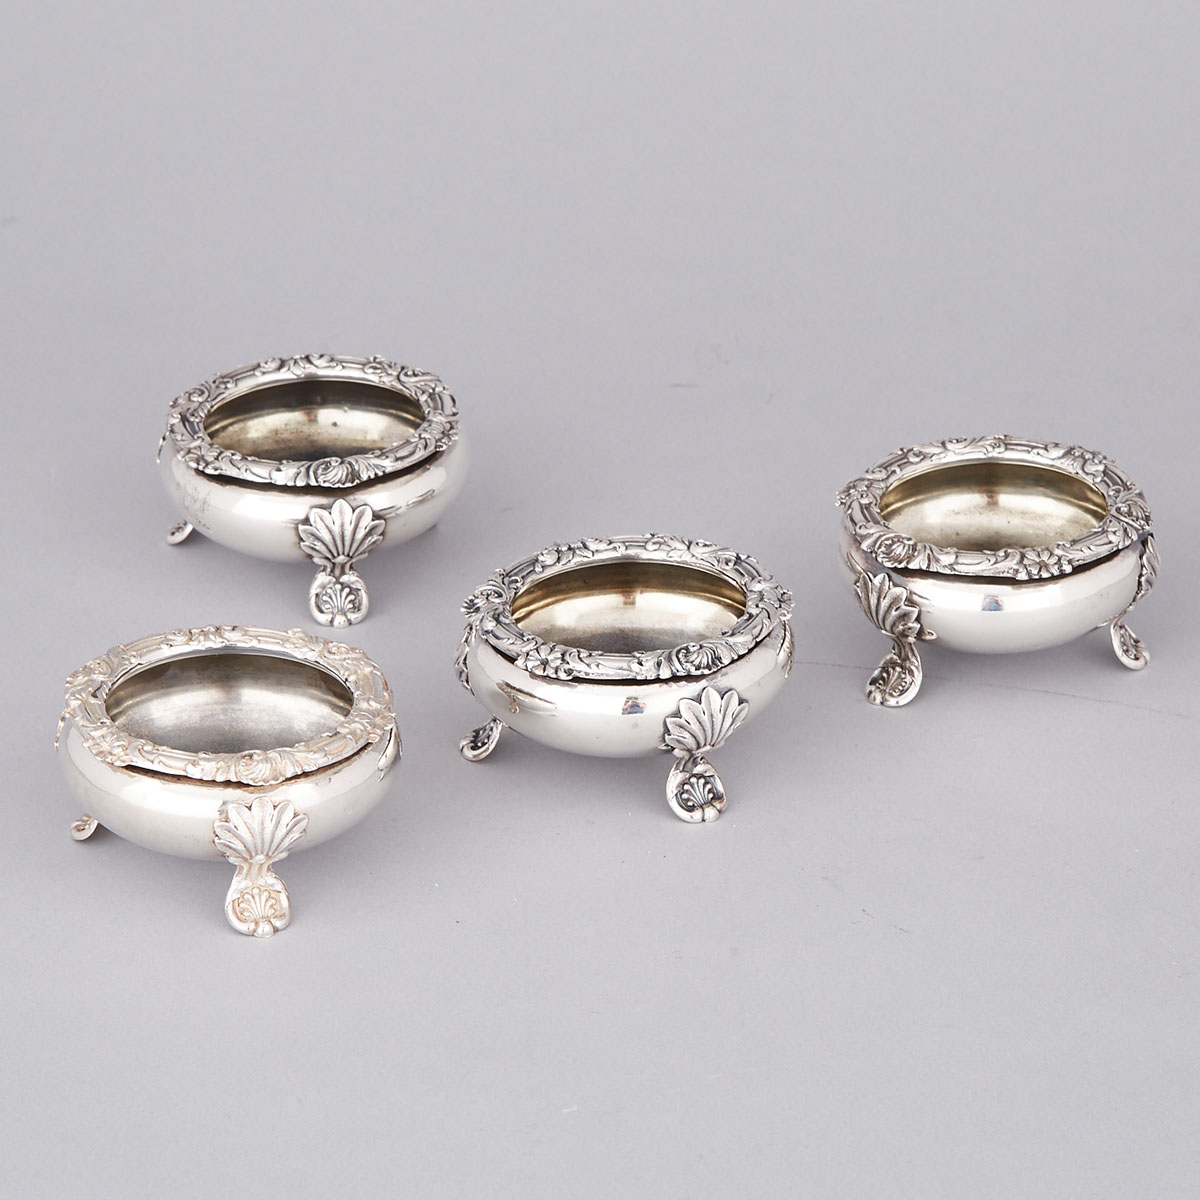 Set of Four Victorian Silver Open Salts, Stephen Smith, London, 1875